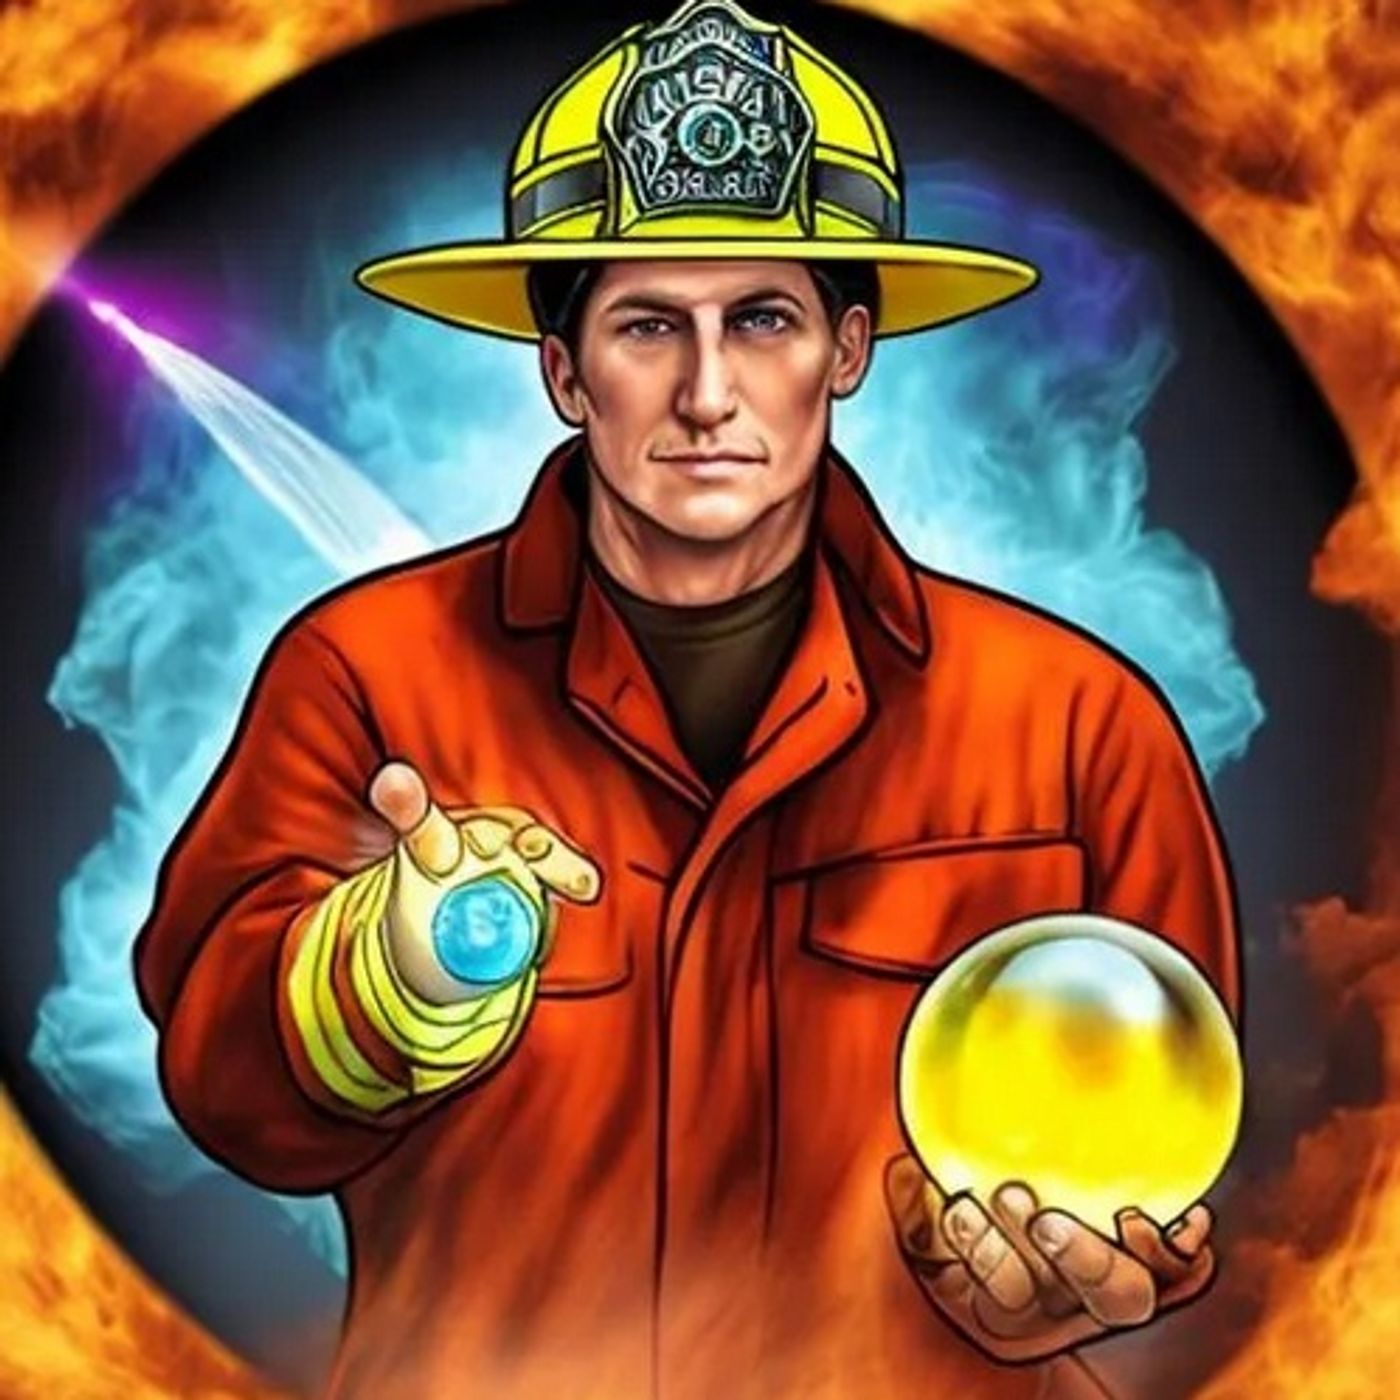 Rob McConnell Interviews - ANDREW RADZIEWICZ - The Psychic Firefighter